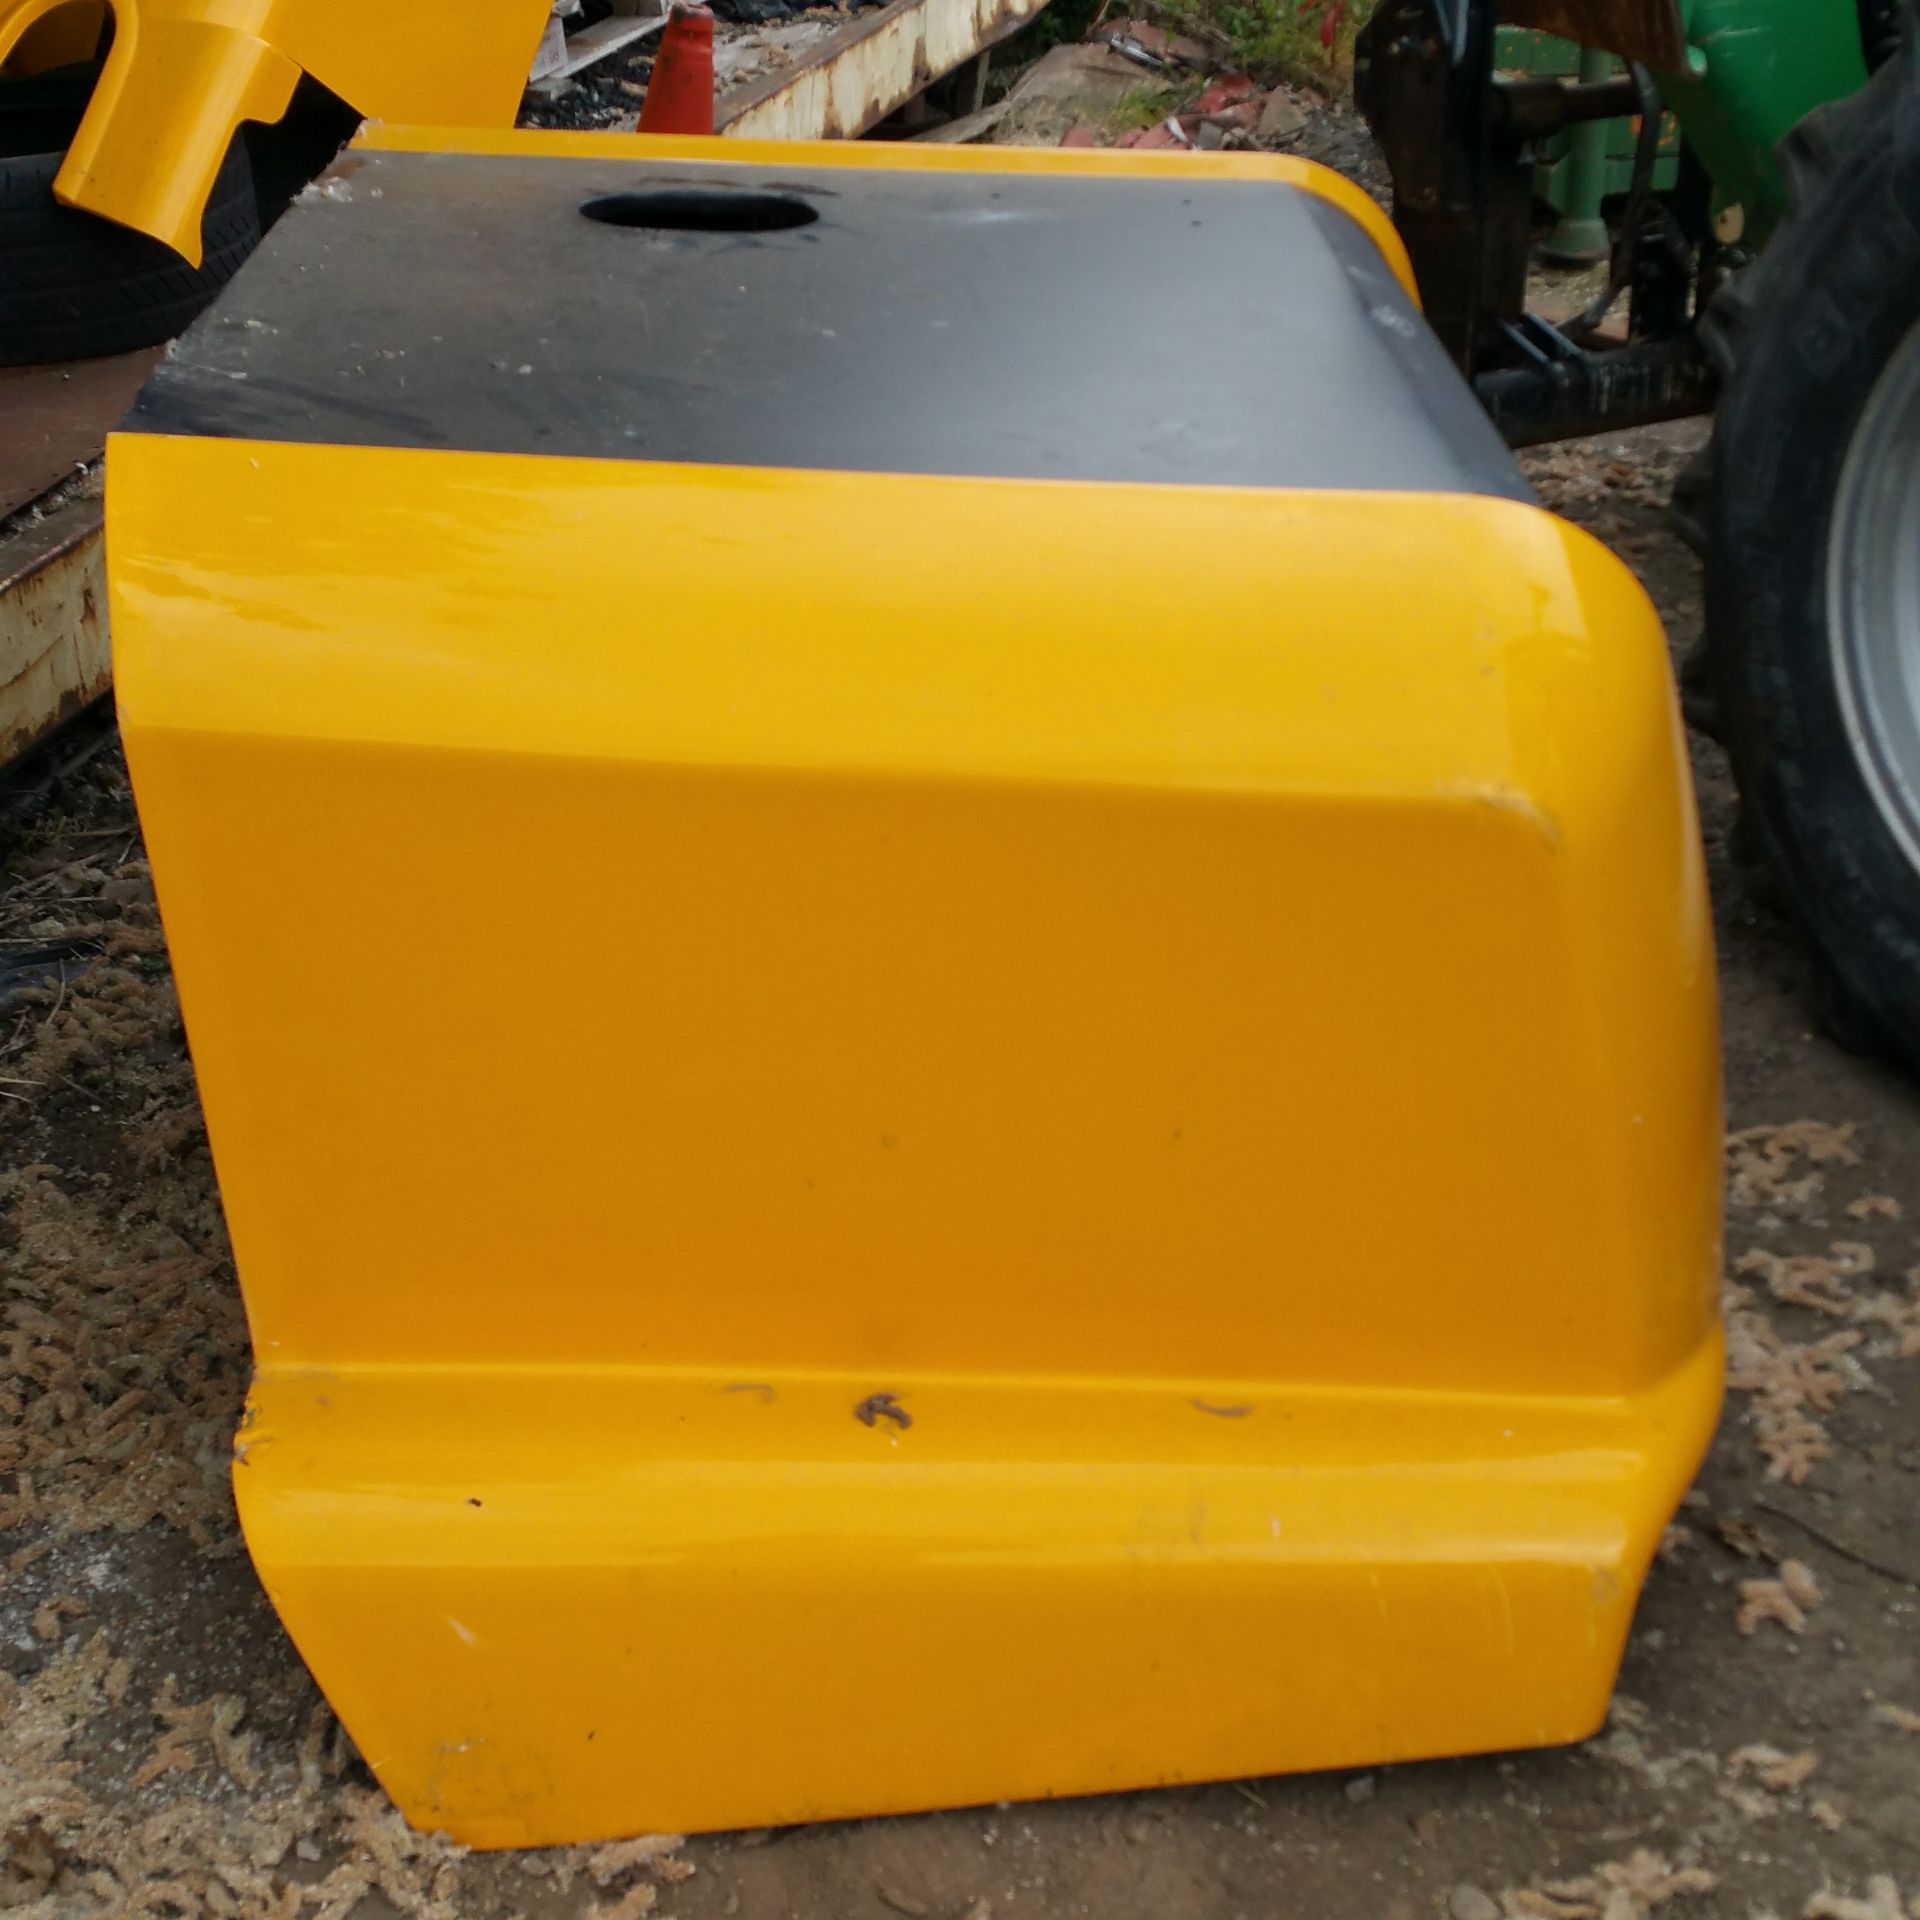 Jcb TM310 bonnet   New and unused   Delivery arranged - Image 2 of 5